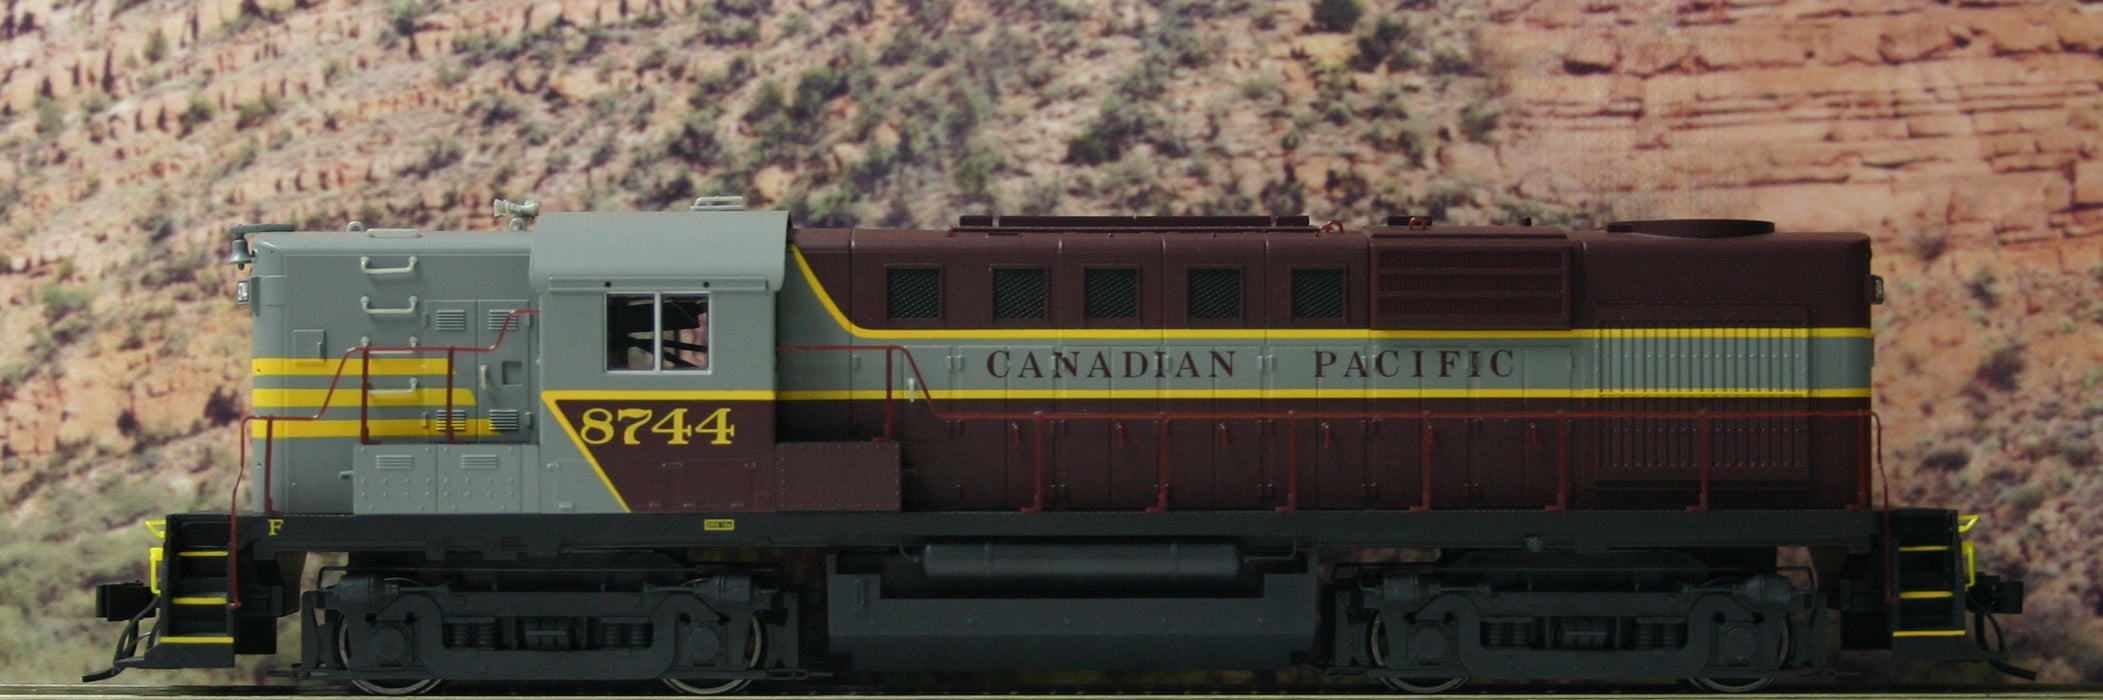 Ho Scale People -  Canada